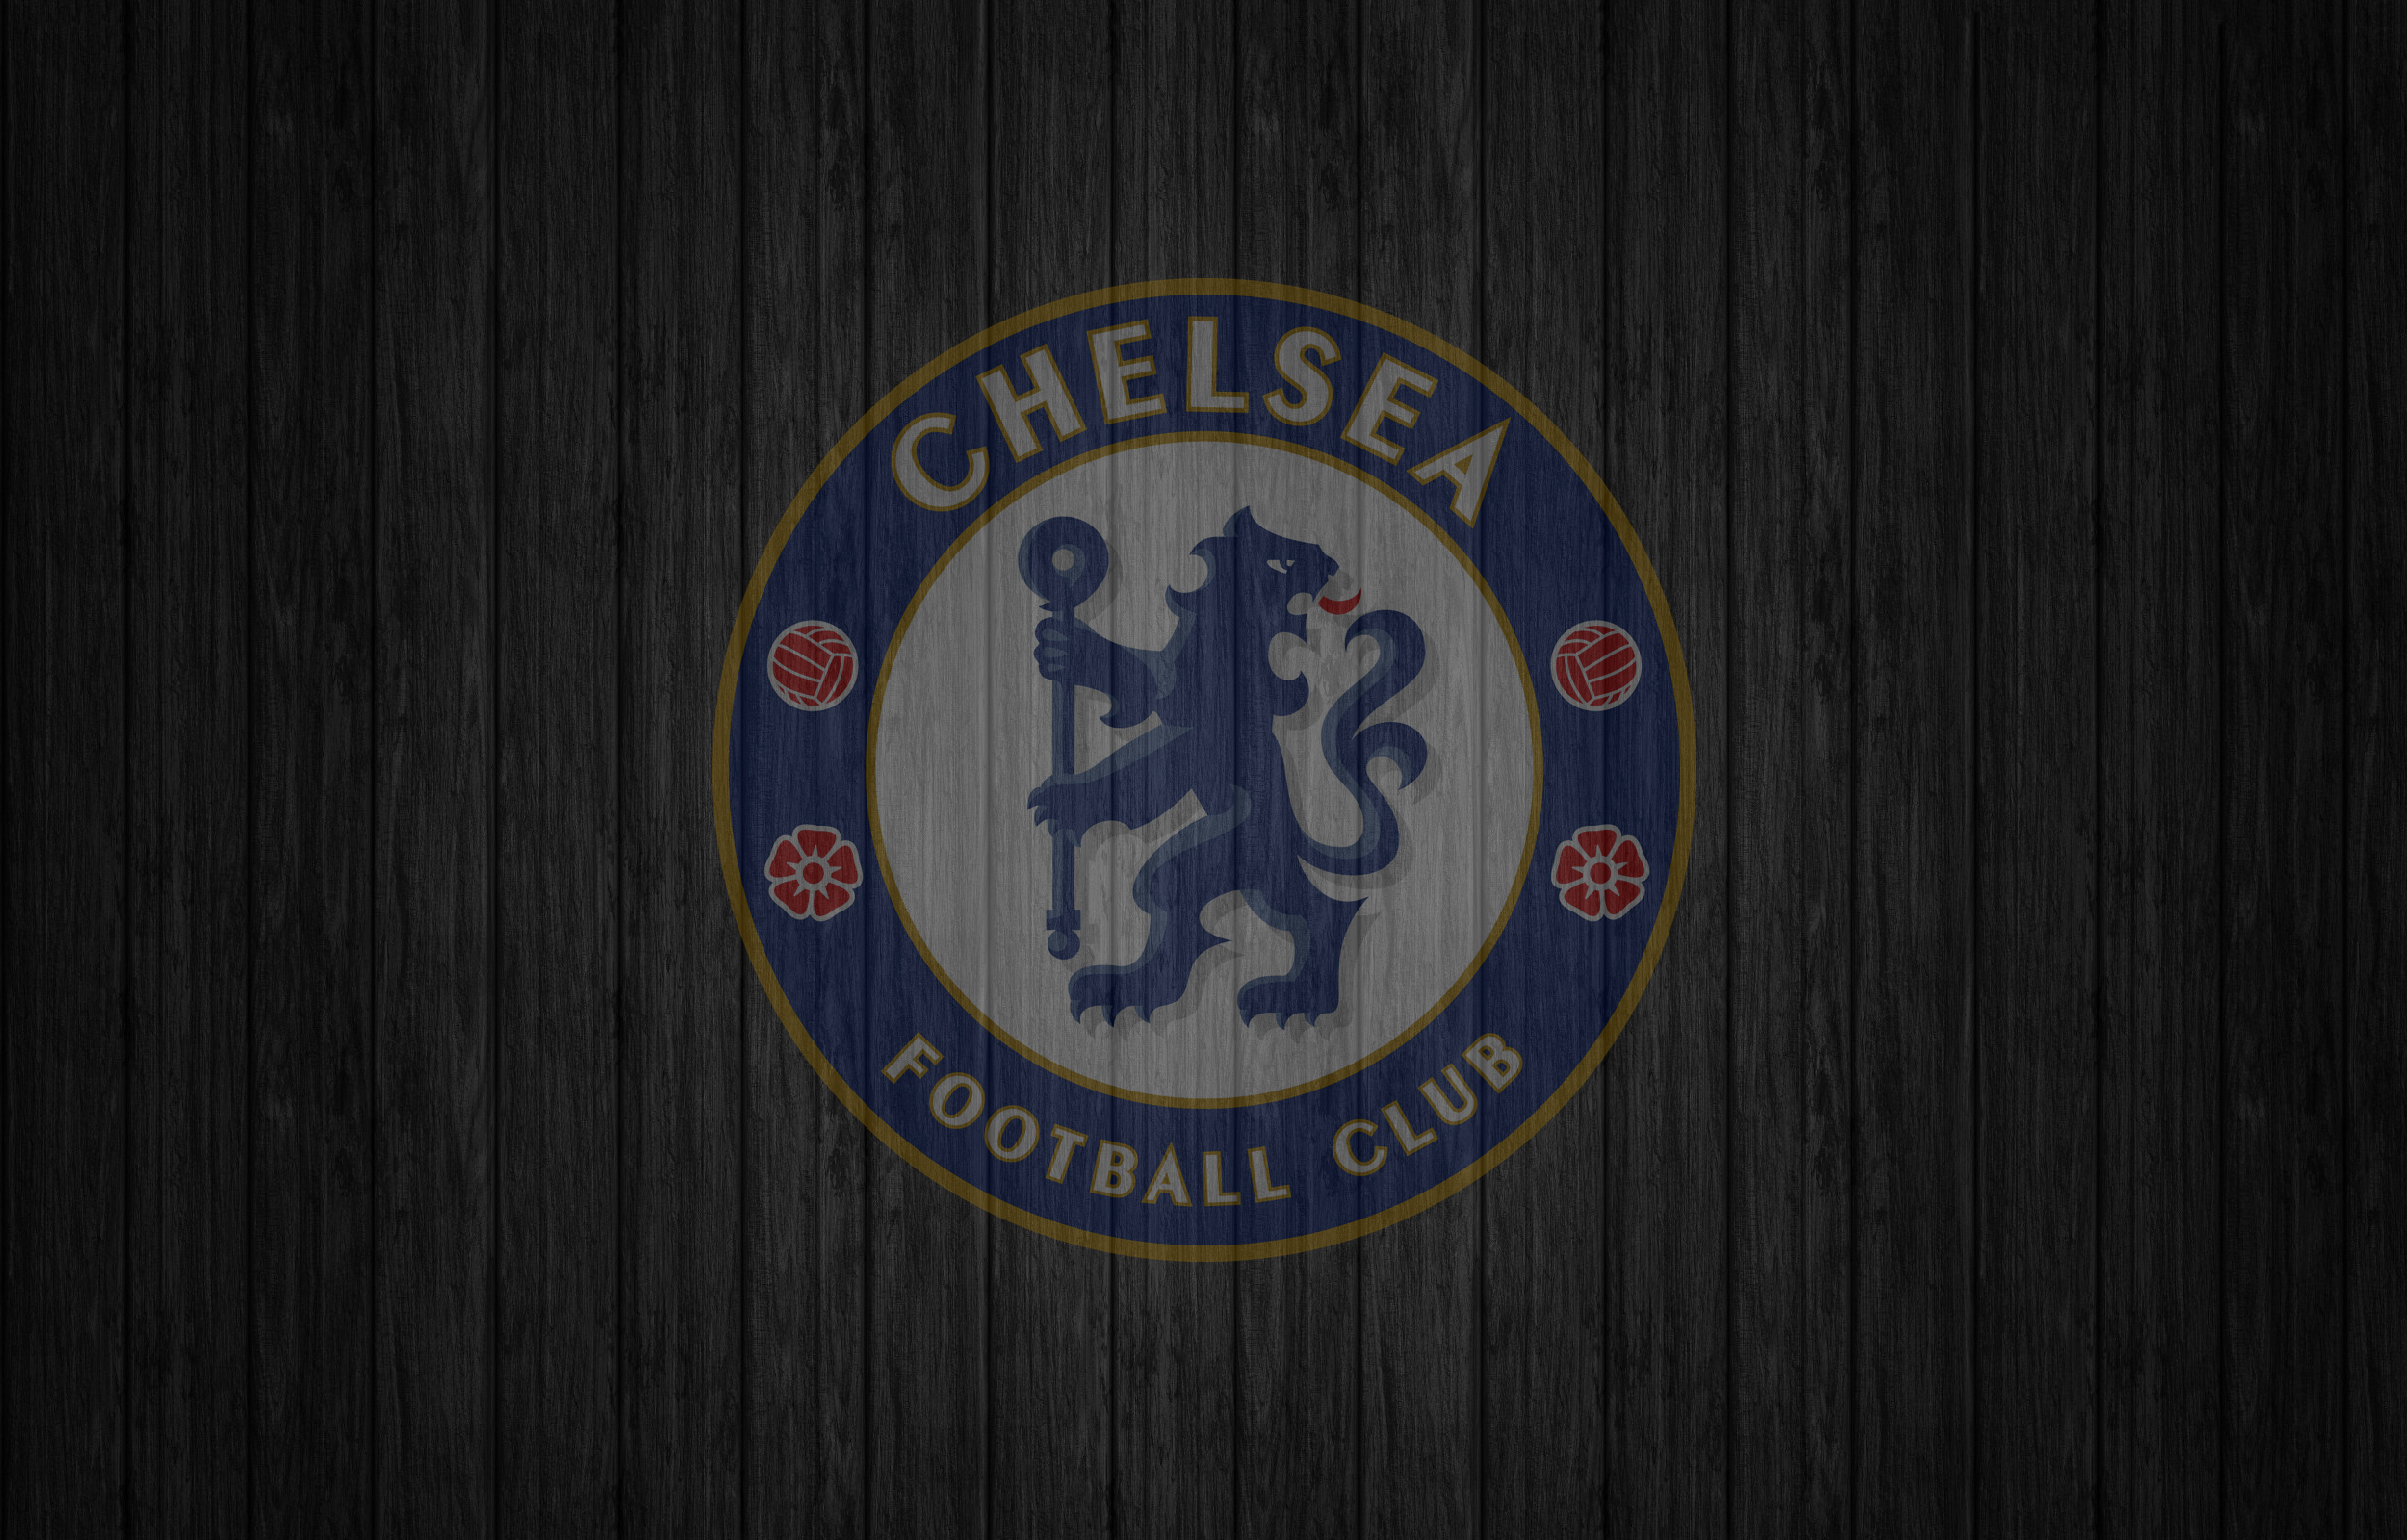 Chelsea Fc Logo, HD Sports, 4k Wallpapers, Images ...